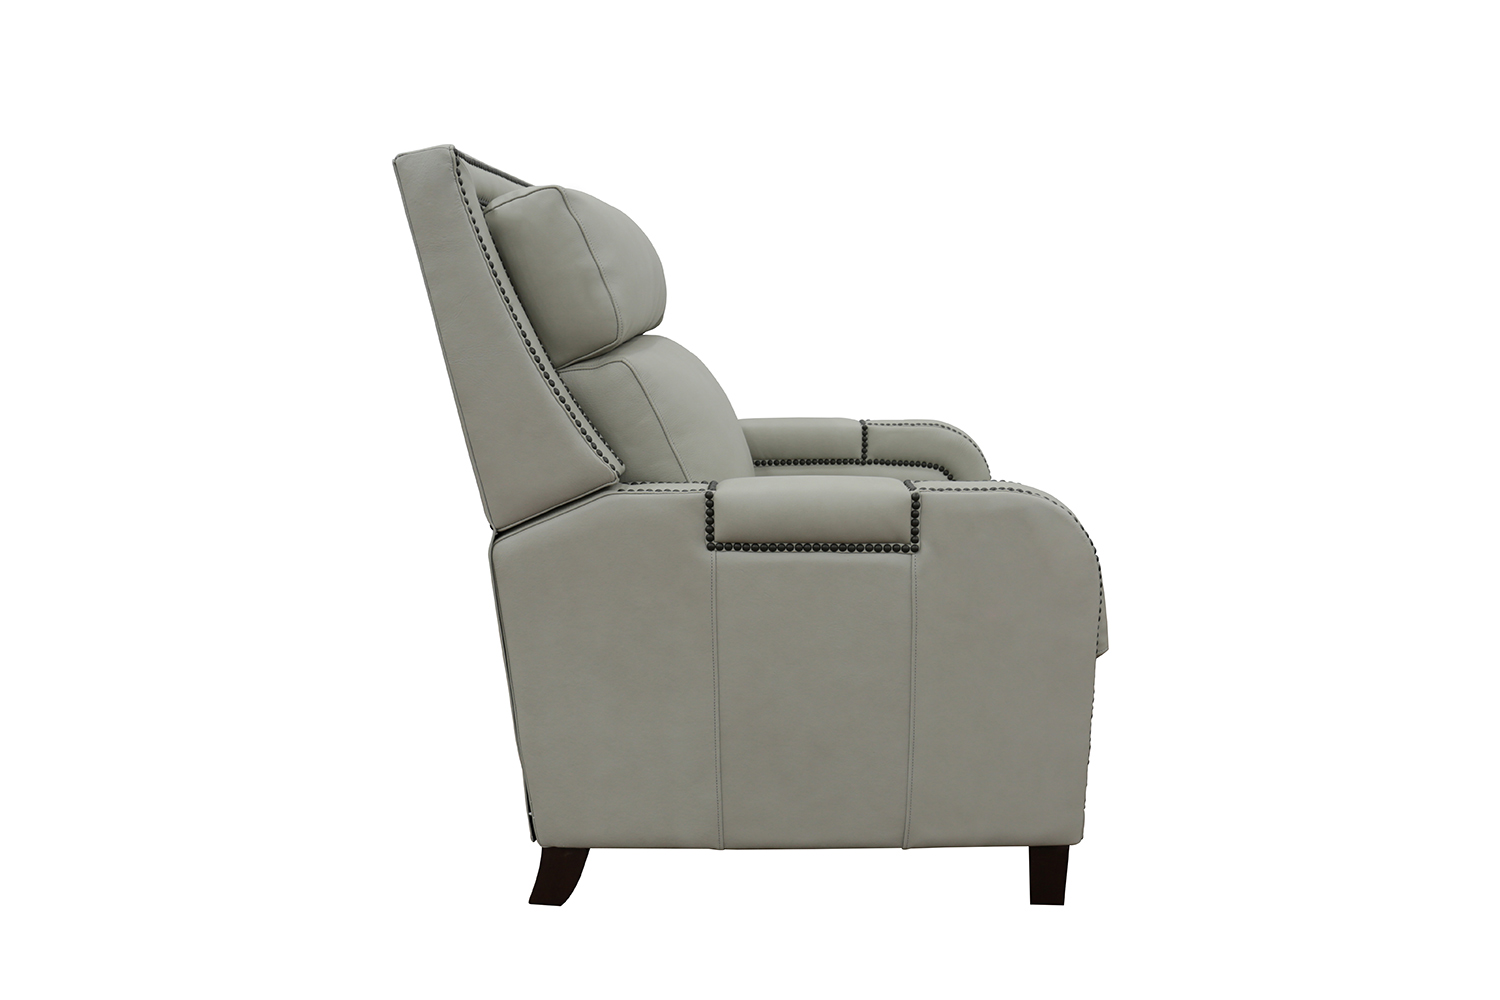 Barcalounger Cambridge Recliner Chair - Wenlock Dove/All Leather